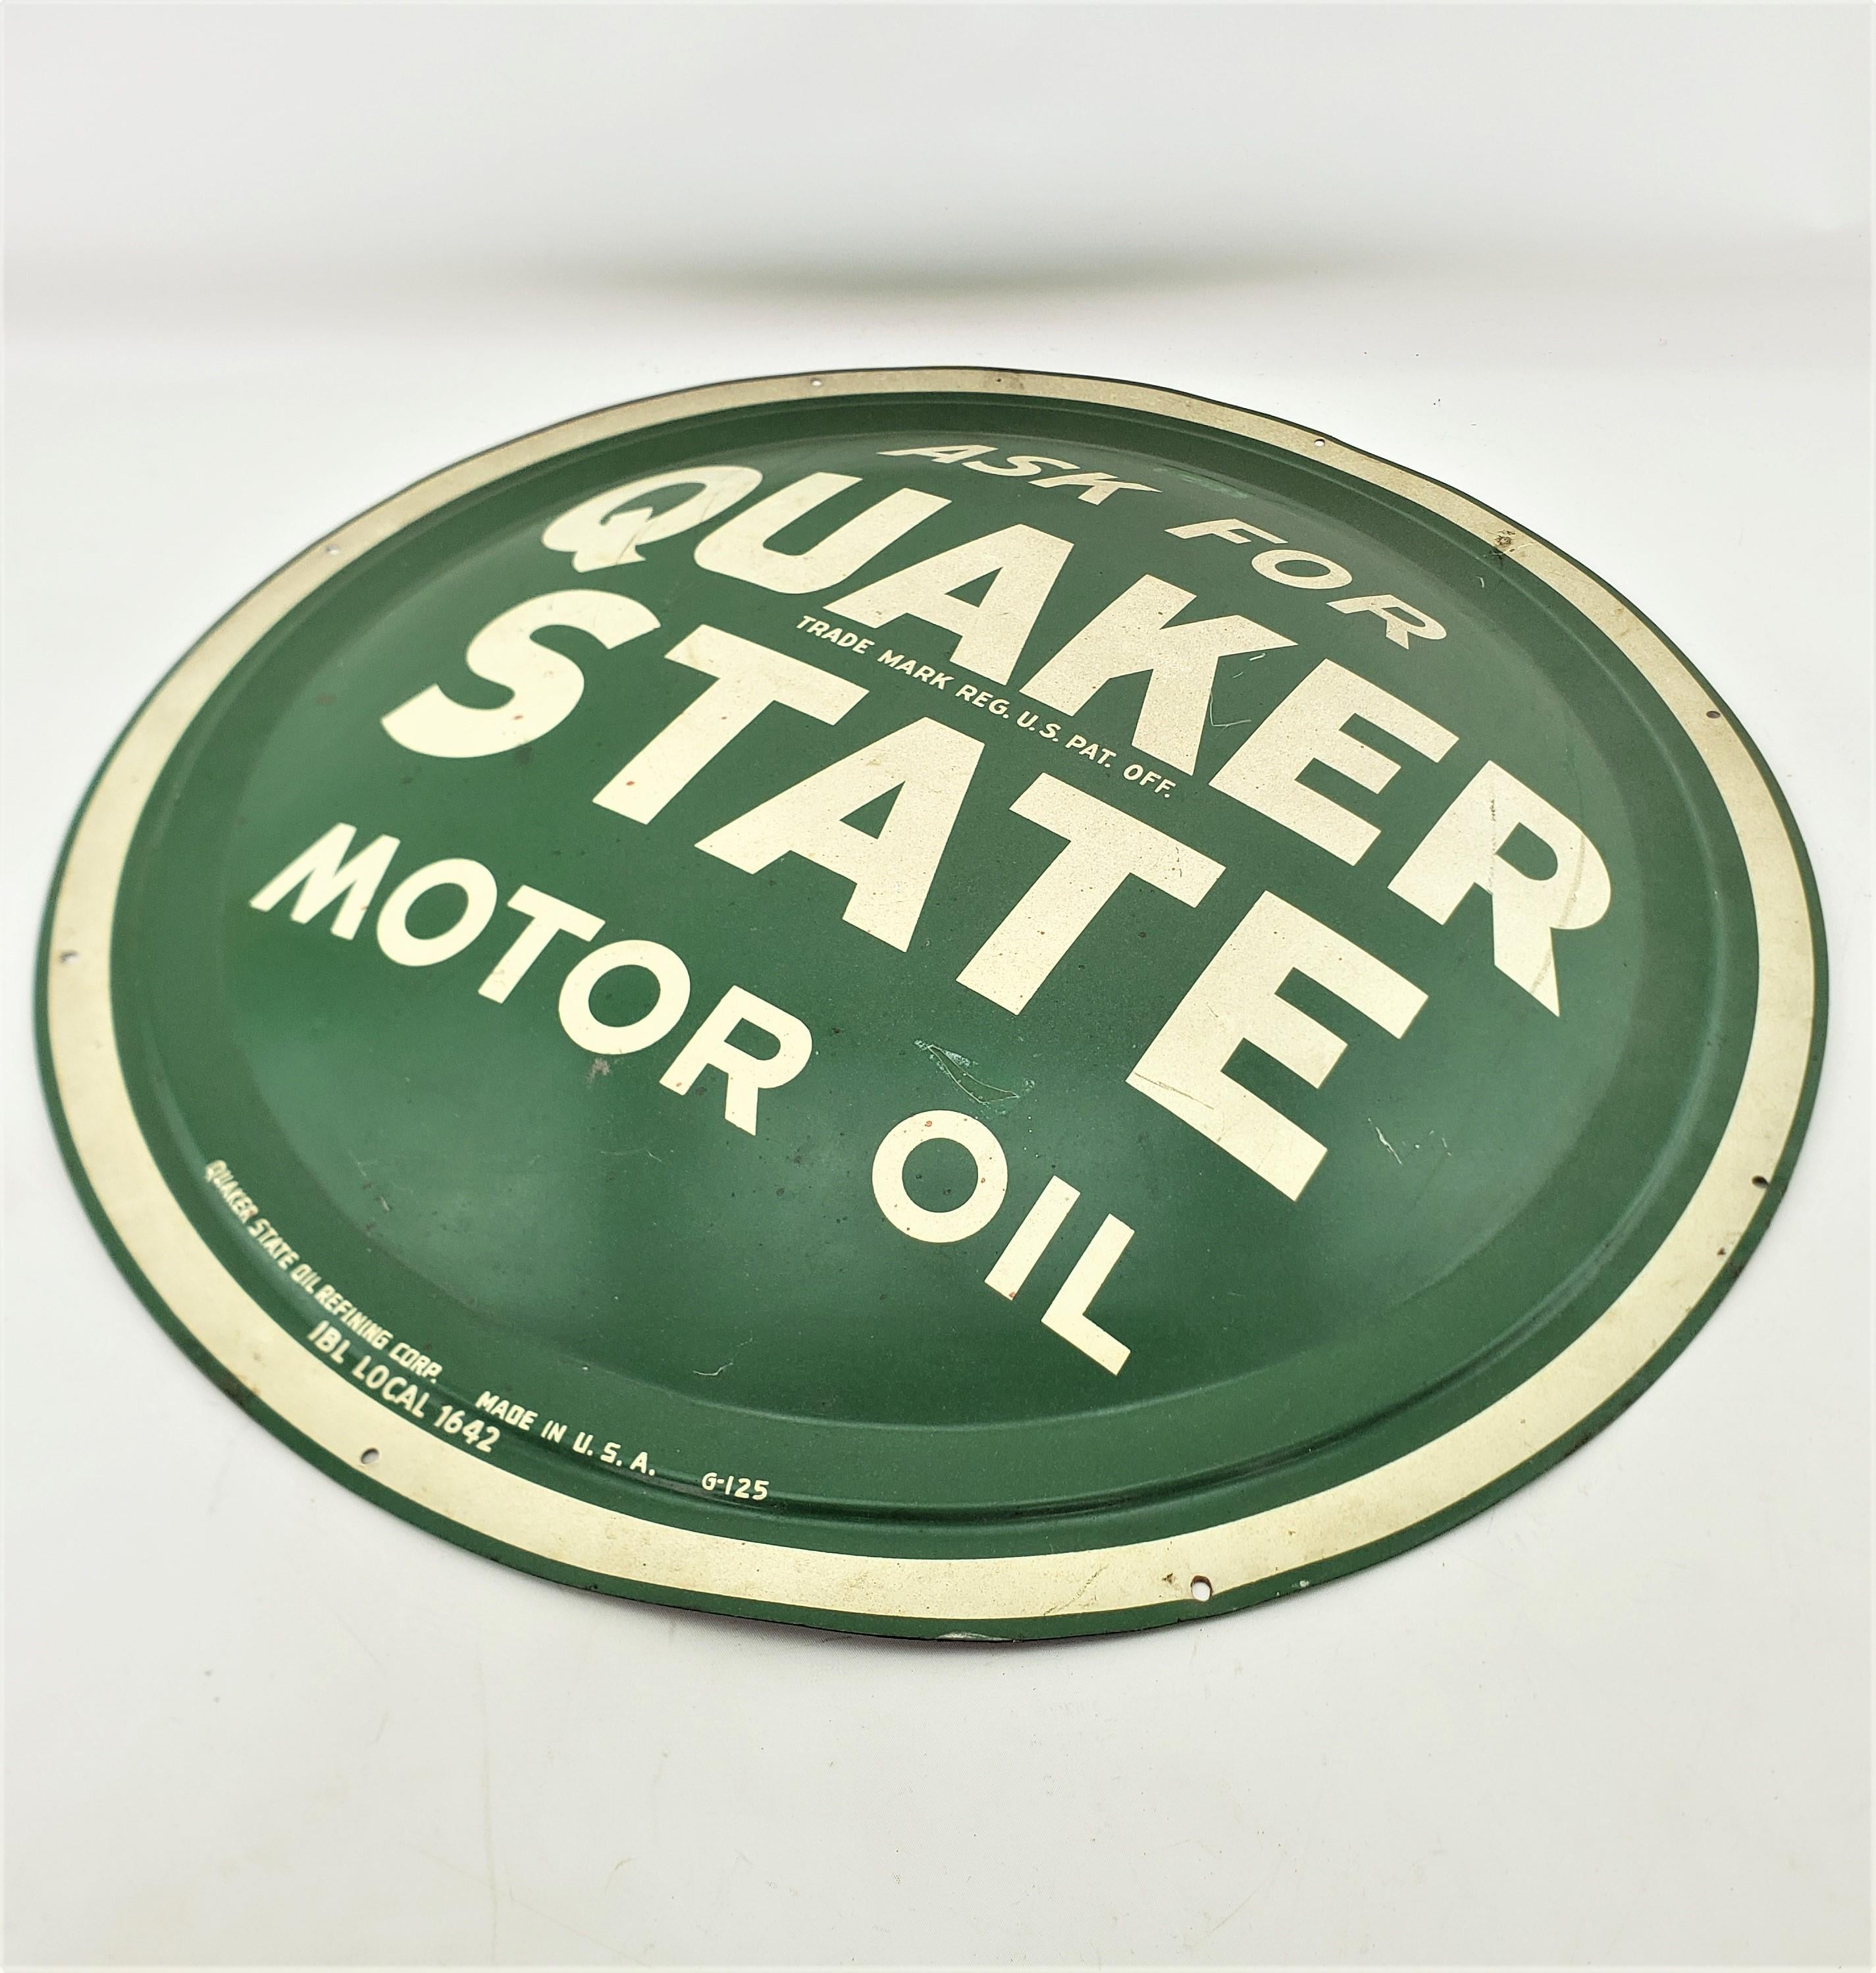 American Midcentury Quaker State Motor Oil Gas Station Metal Advertising 'Button' Sign